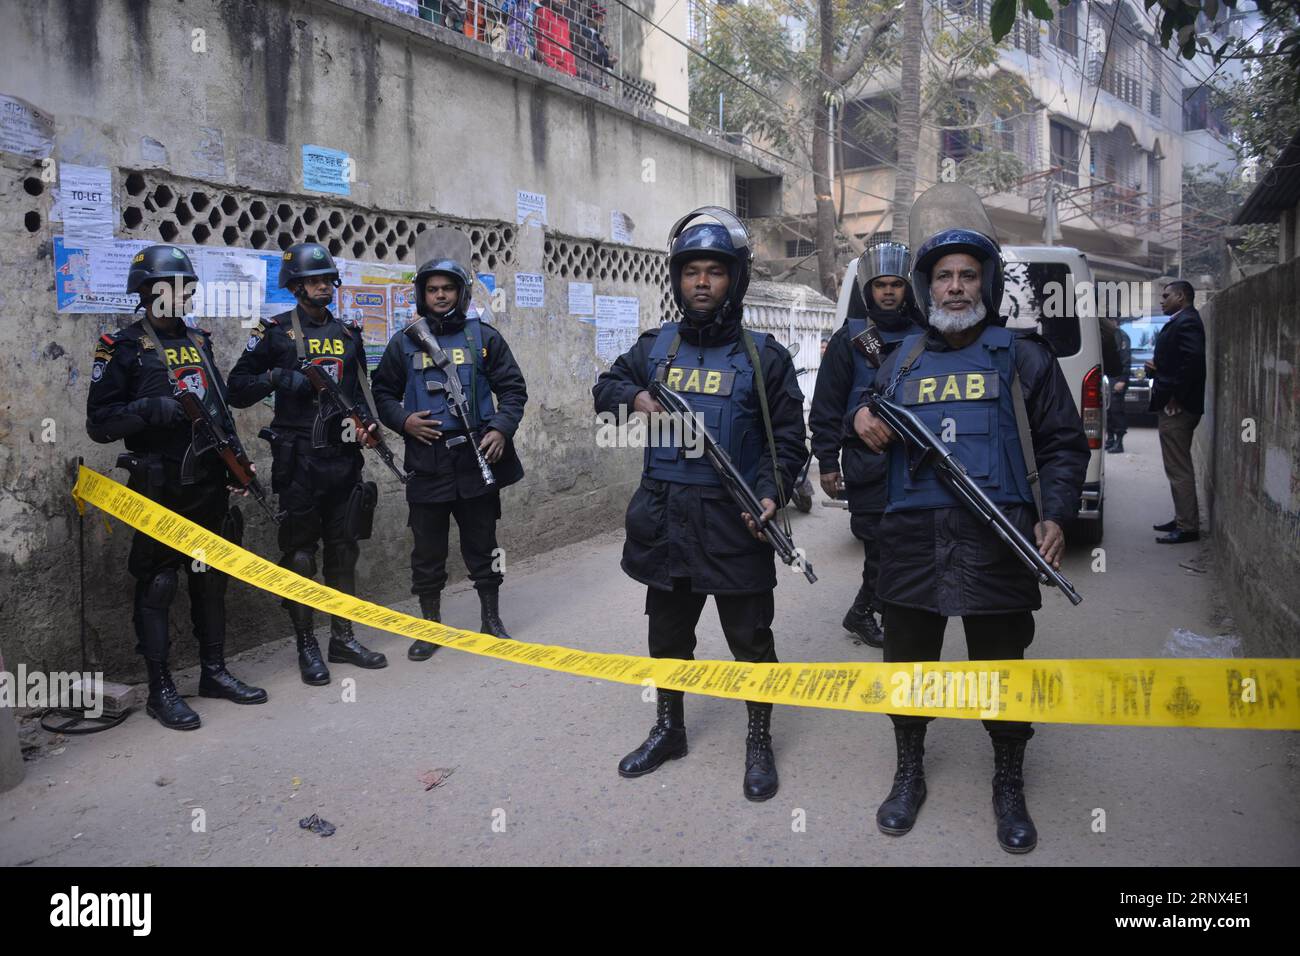 (180112) -- DHAKA, Jan. 12, 2018 -- Members of Rapid Action Battalion gather during a raid in Dhaka, capital of Bangladesh, Jan. 12, 2018. Three militants were killed on Friday morning in a raid launched by Bangladesh s anti-crime elite force on a militant hideout near Prime Minister Sheikh Hasina s office in capital Dhaka. ) (djj) BANGLADESH-DHAKA-MILITANT-HIDEOUT-RAID SalimxReza PUBLICATIONxNOTxINxCHN Stock Photo